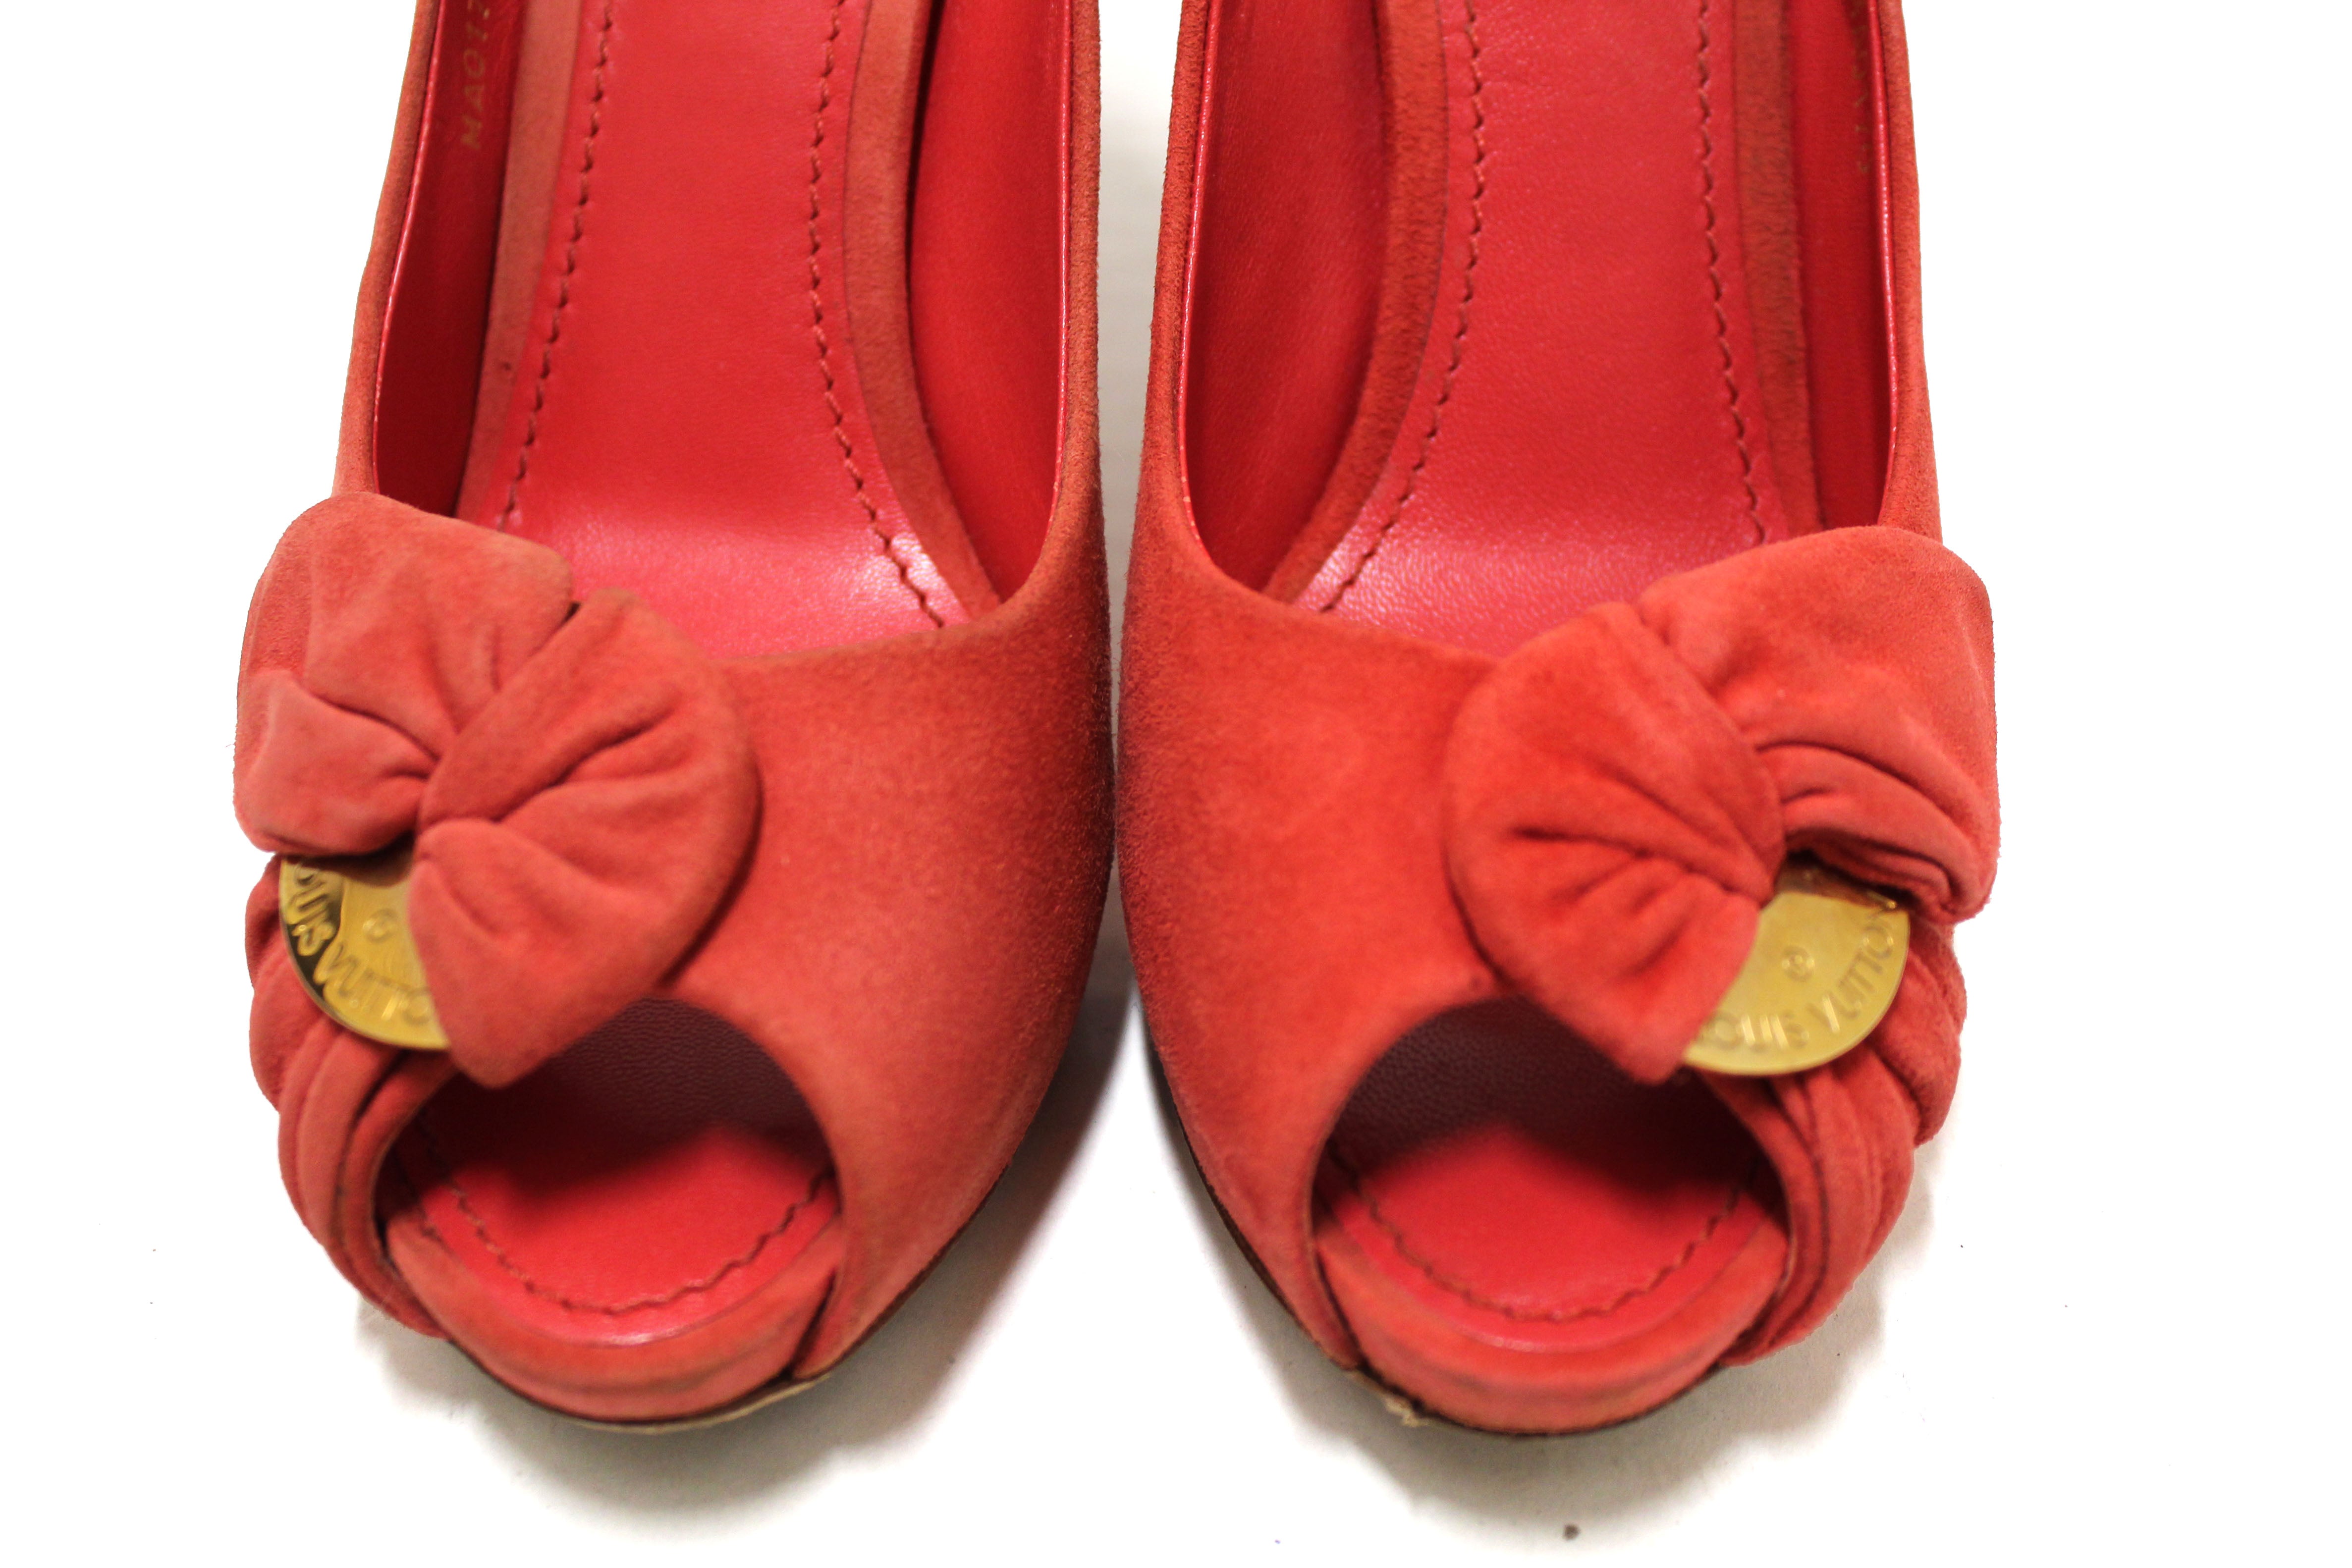 Louis Vuitton Red Suede Oh Really! Peep Toe Platform Pumps Size 39.5 at  1stDibs  louis vuitton pumps rote sohle, red louis vuitton shoes heels,  red platform pumps